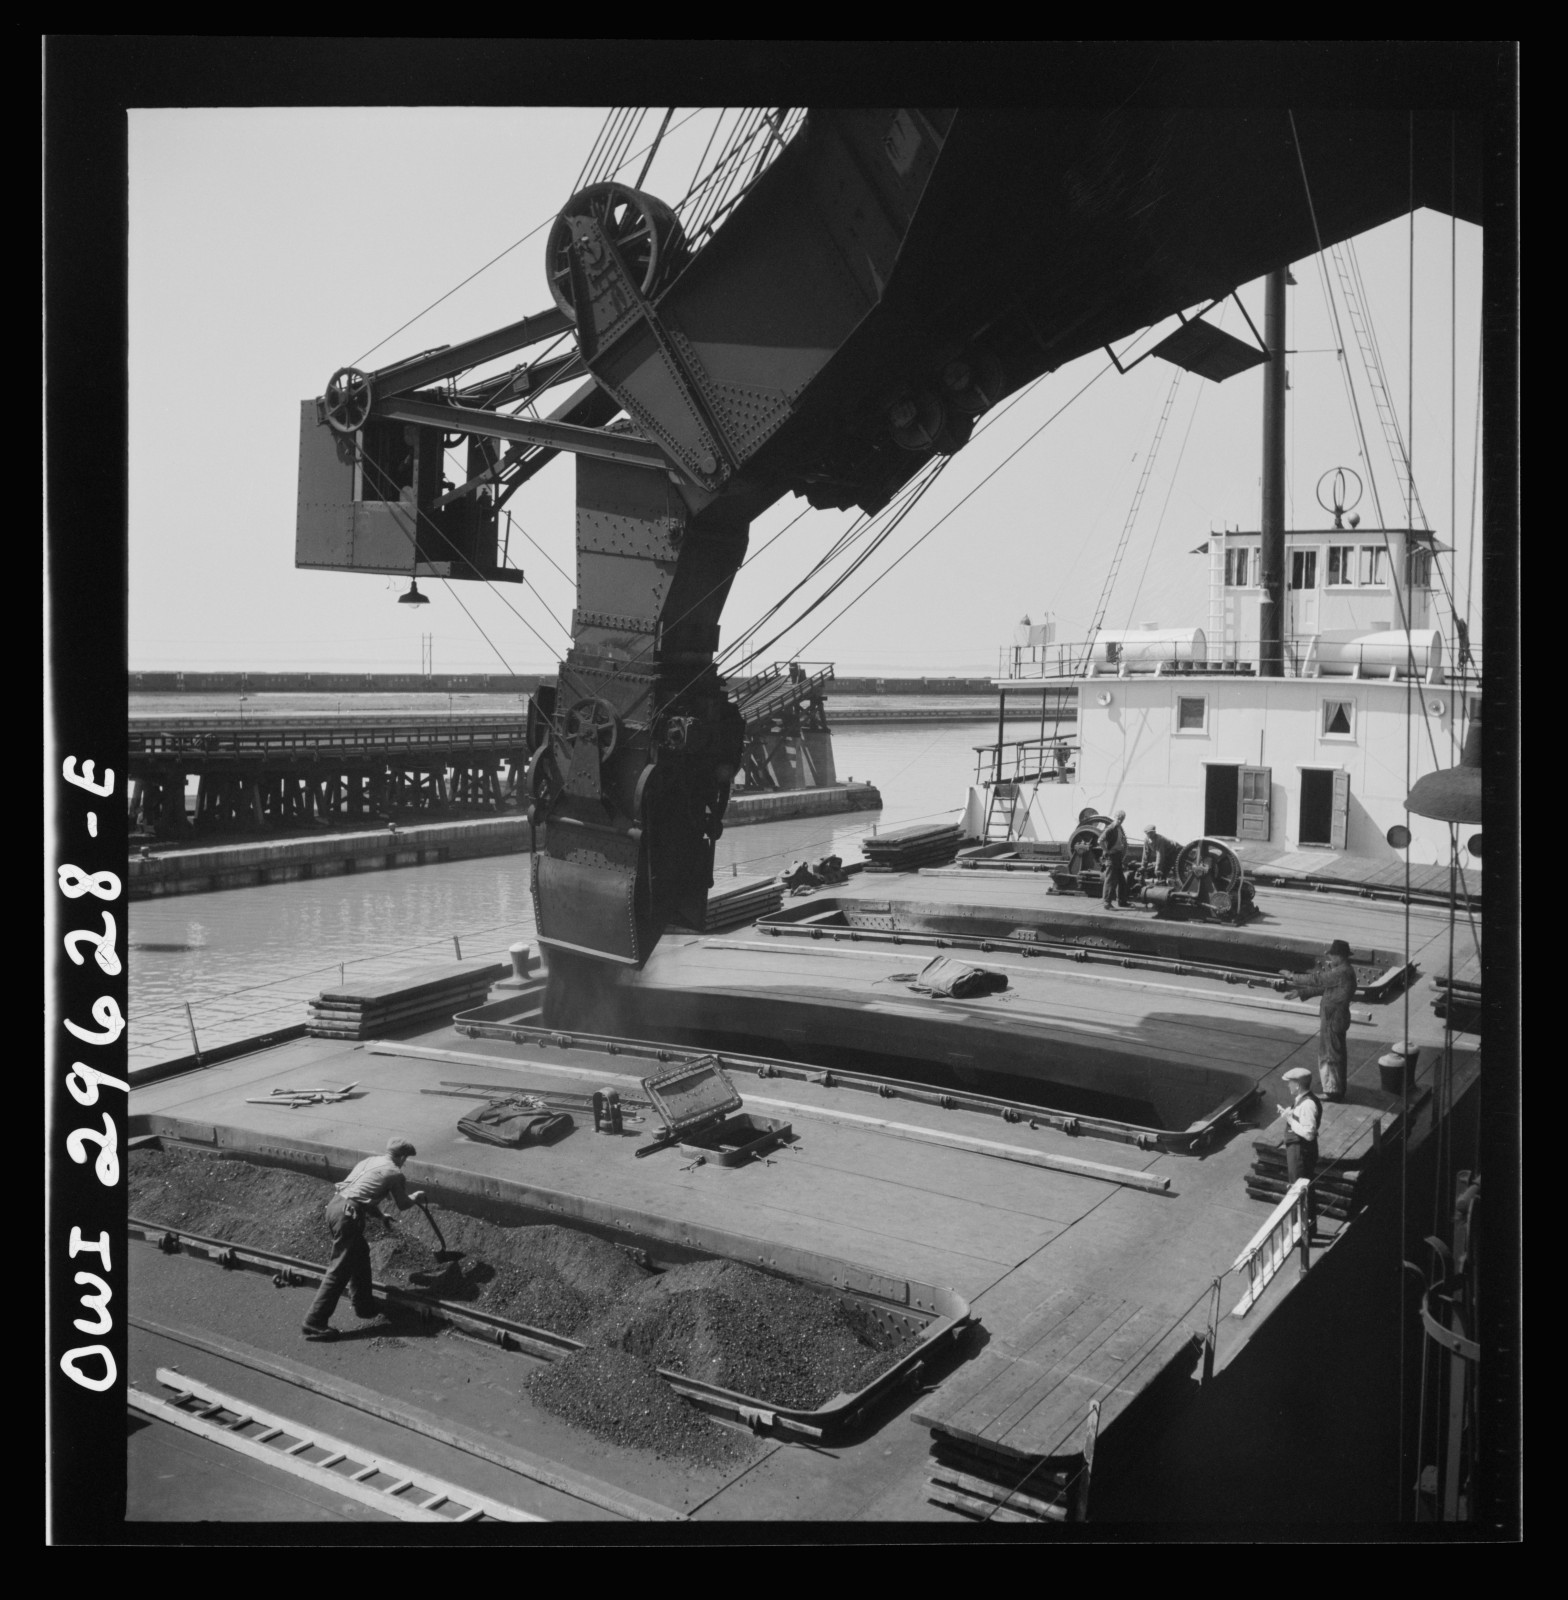 Coal is loaded onto a lake freighter at the Pennsylvania Railroad docks in Sandusky, Ohio in May, 1943. Photo Credit: Jack Delano / Library of Congress, Prints & Photographs Division, FSA/OWI Collection [LC-DIG-fsa-8d29908]